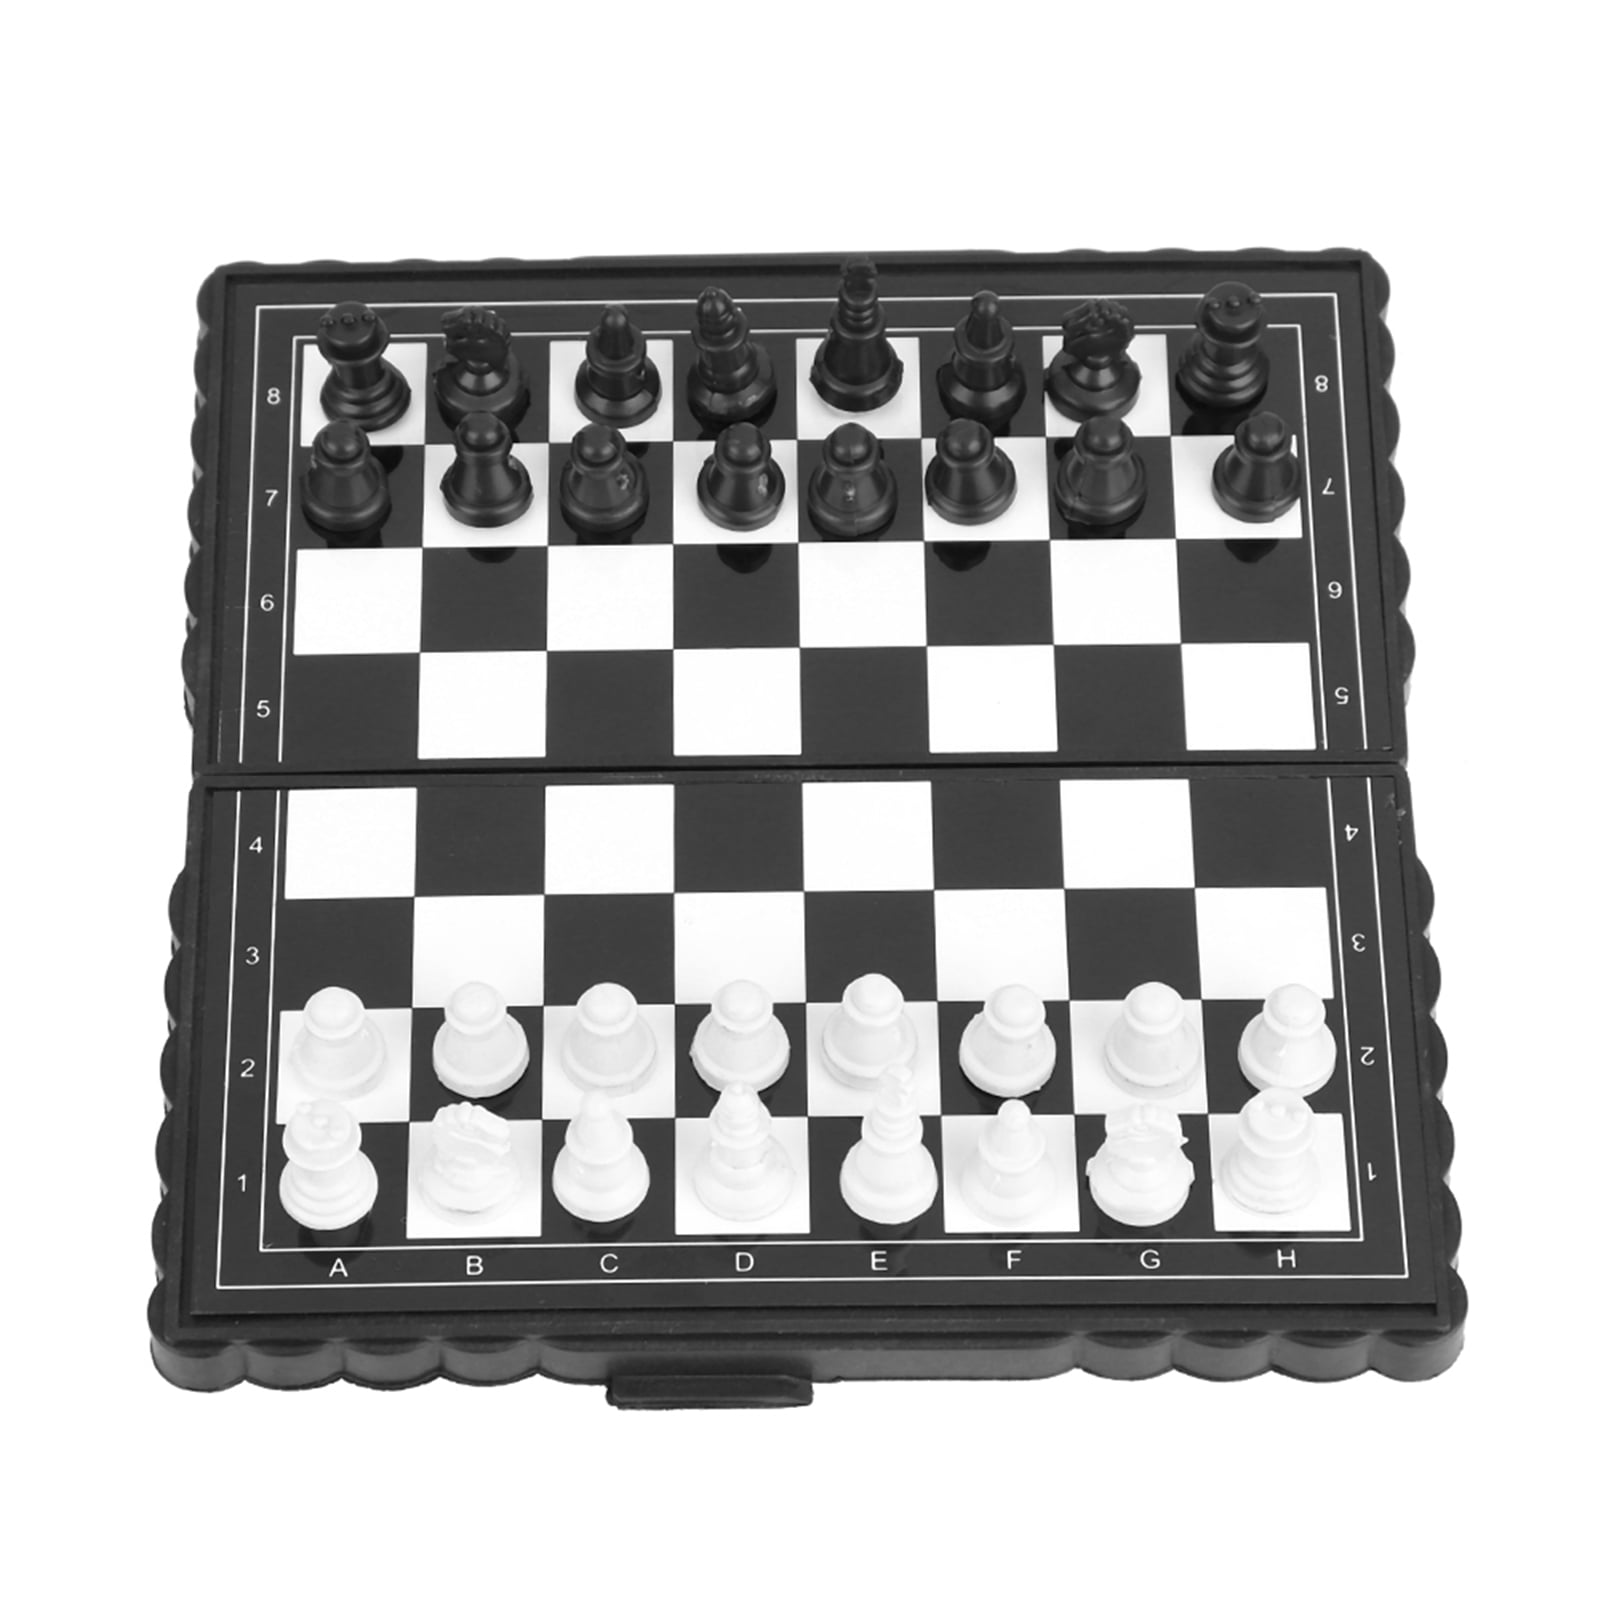 Details about   Folding Chess Magnetic Chess Set Chess for Party Family Activities Traveling